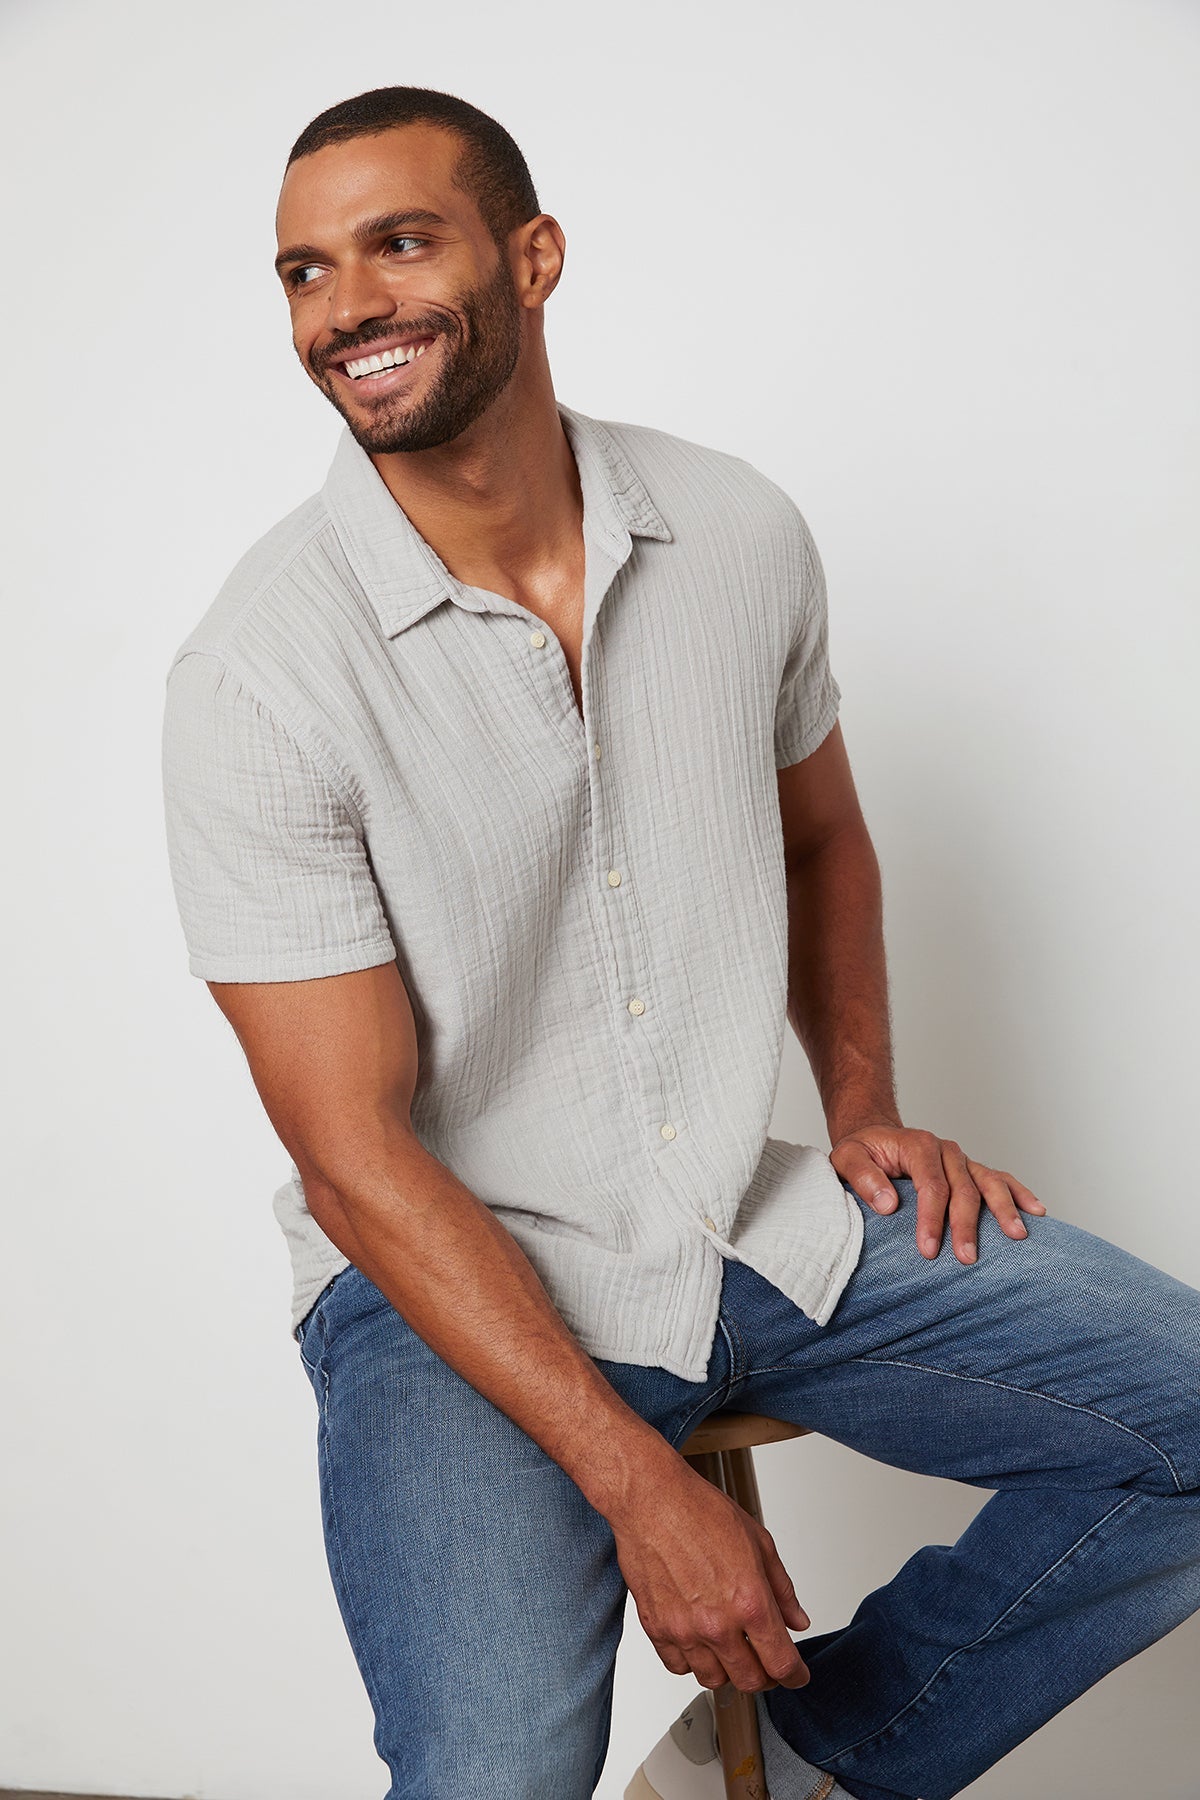 Cotton gauze Christian button up shirt in light grey with model smiling and sitting on stool.-26133746024641